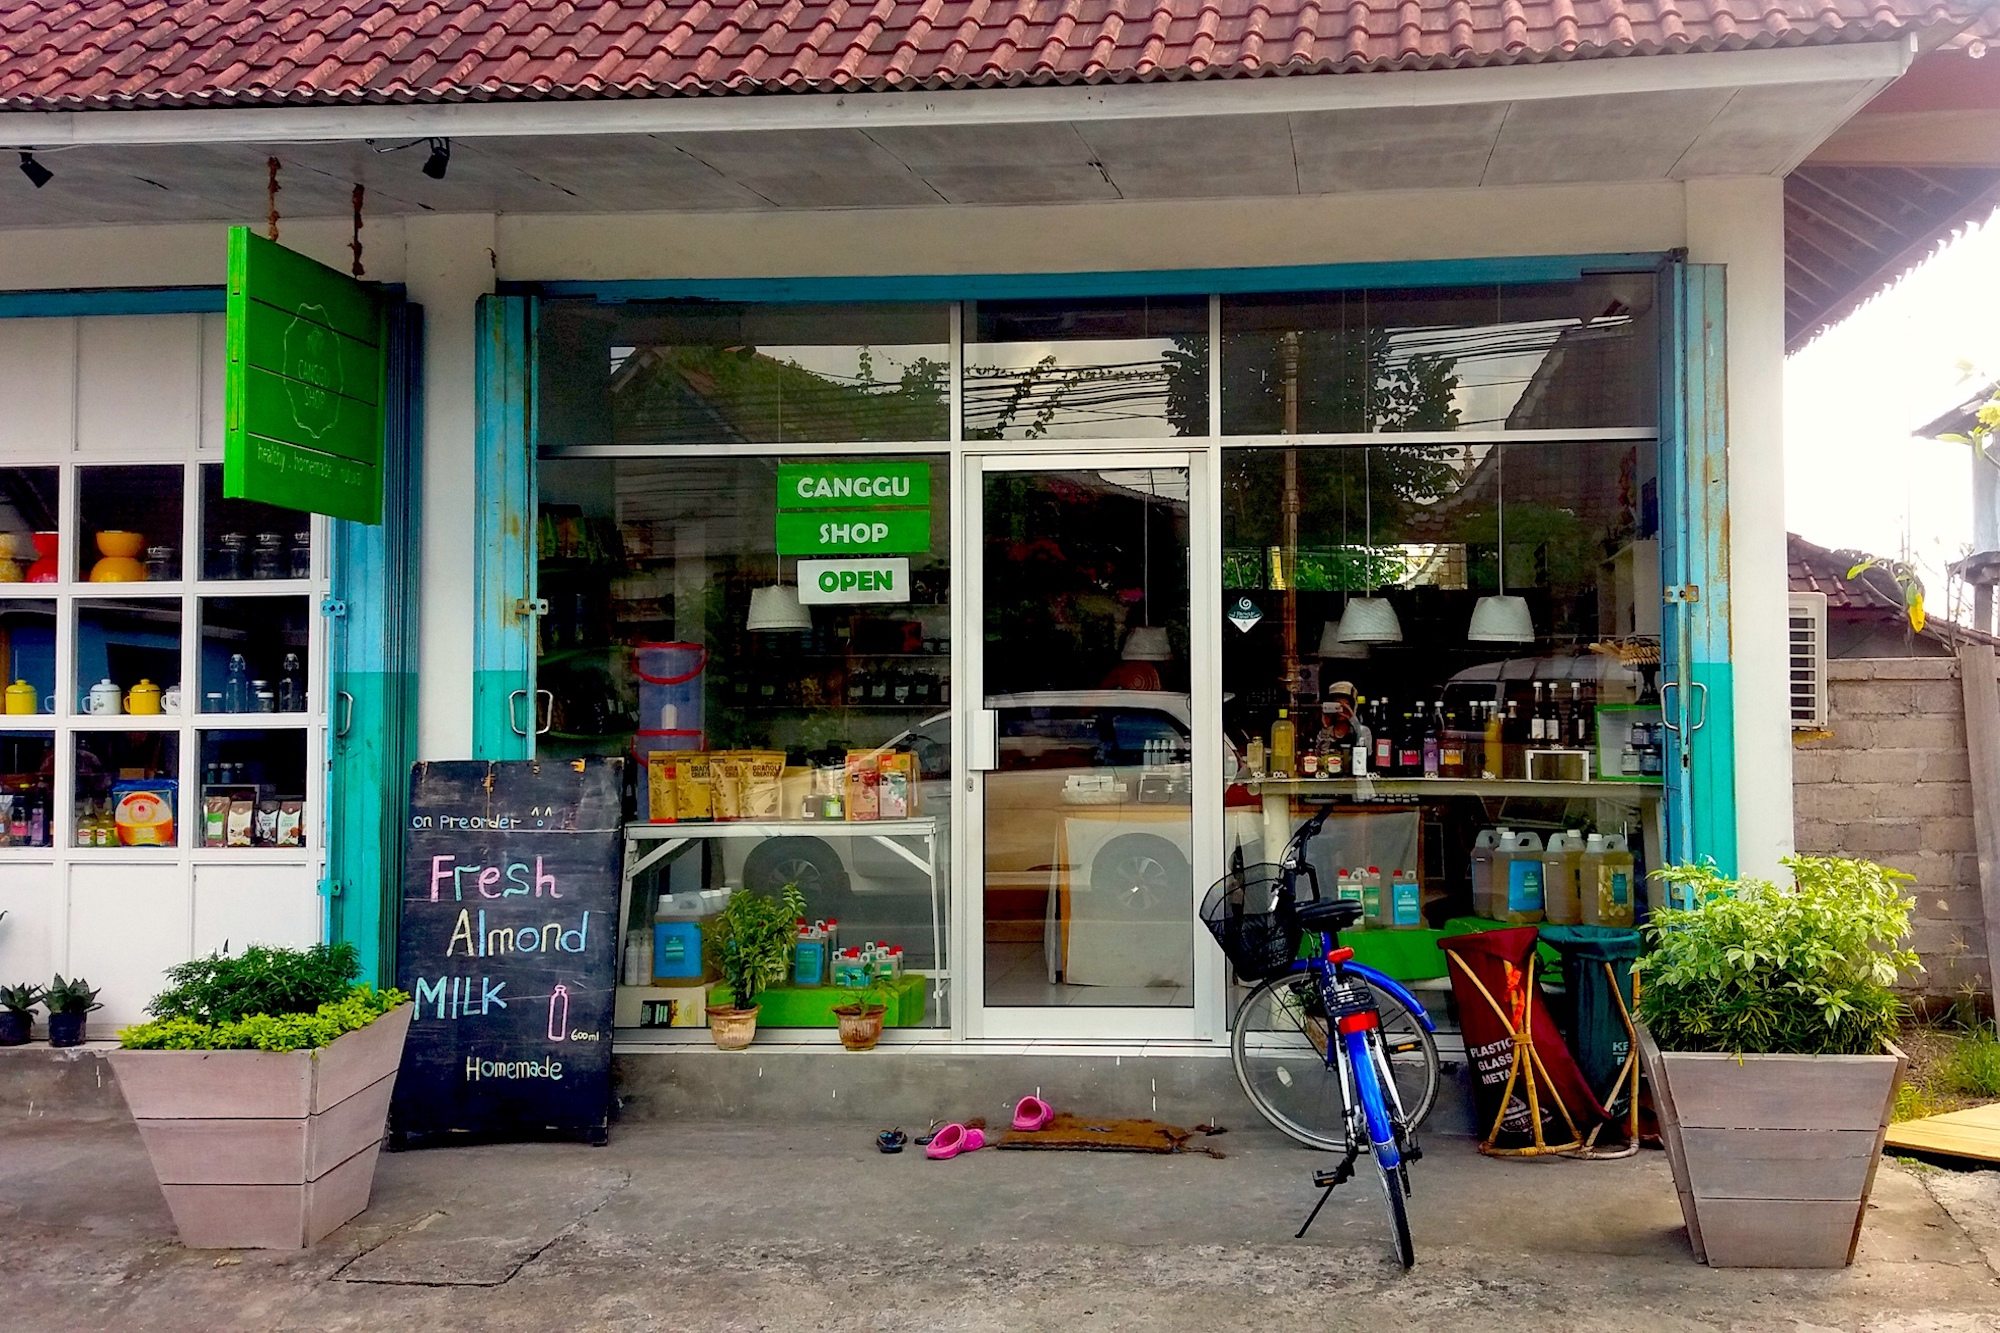 Where Can I Buy Groceries in Canggu?